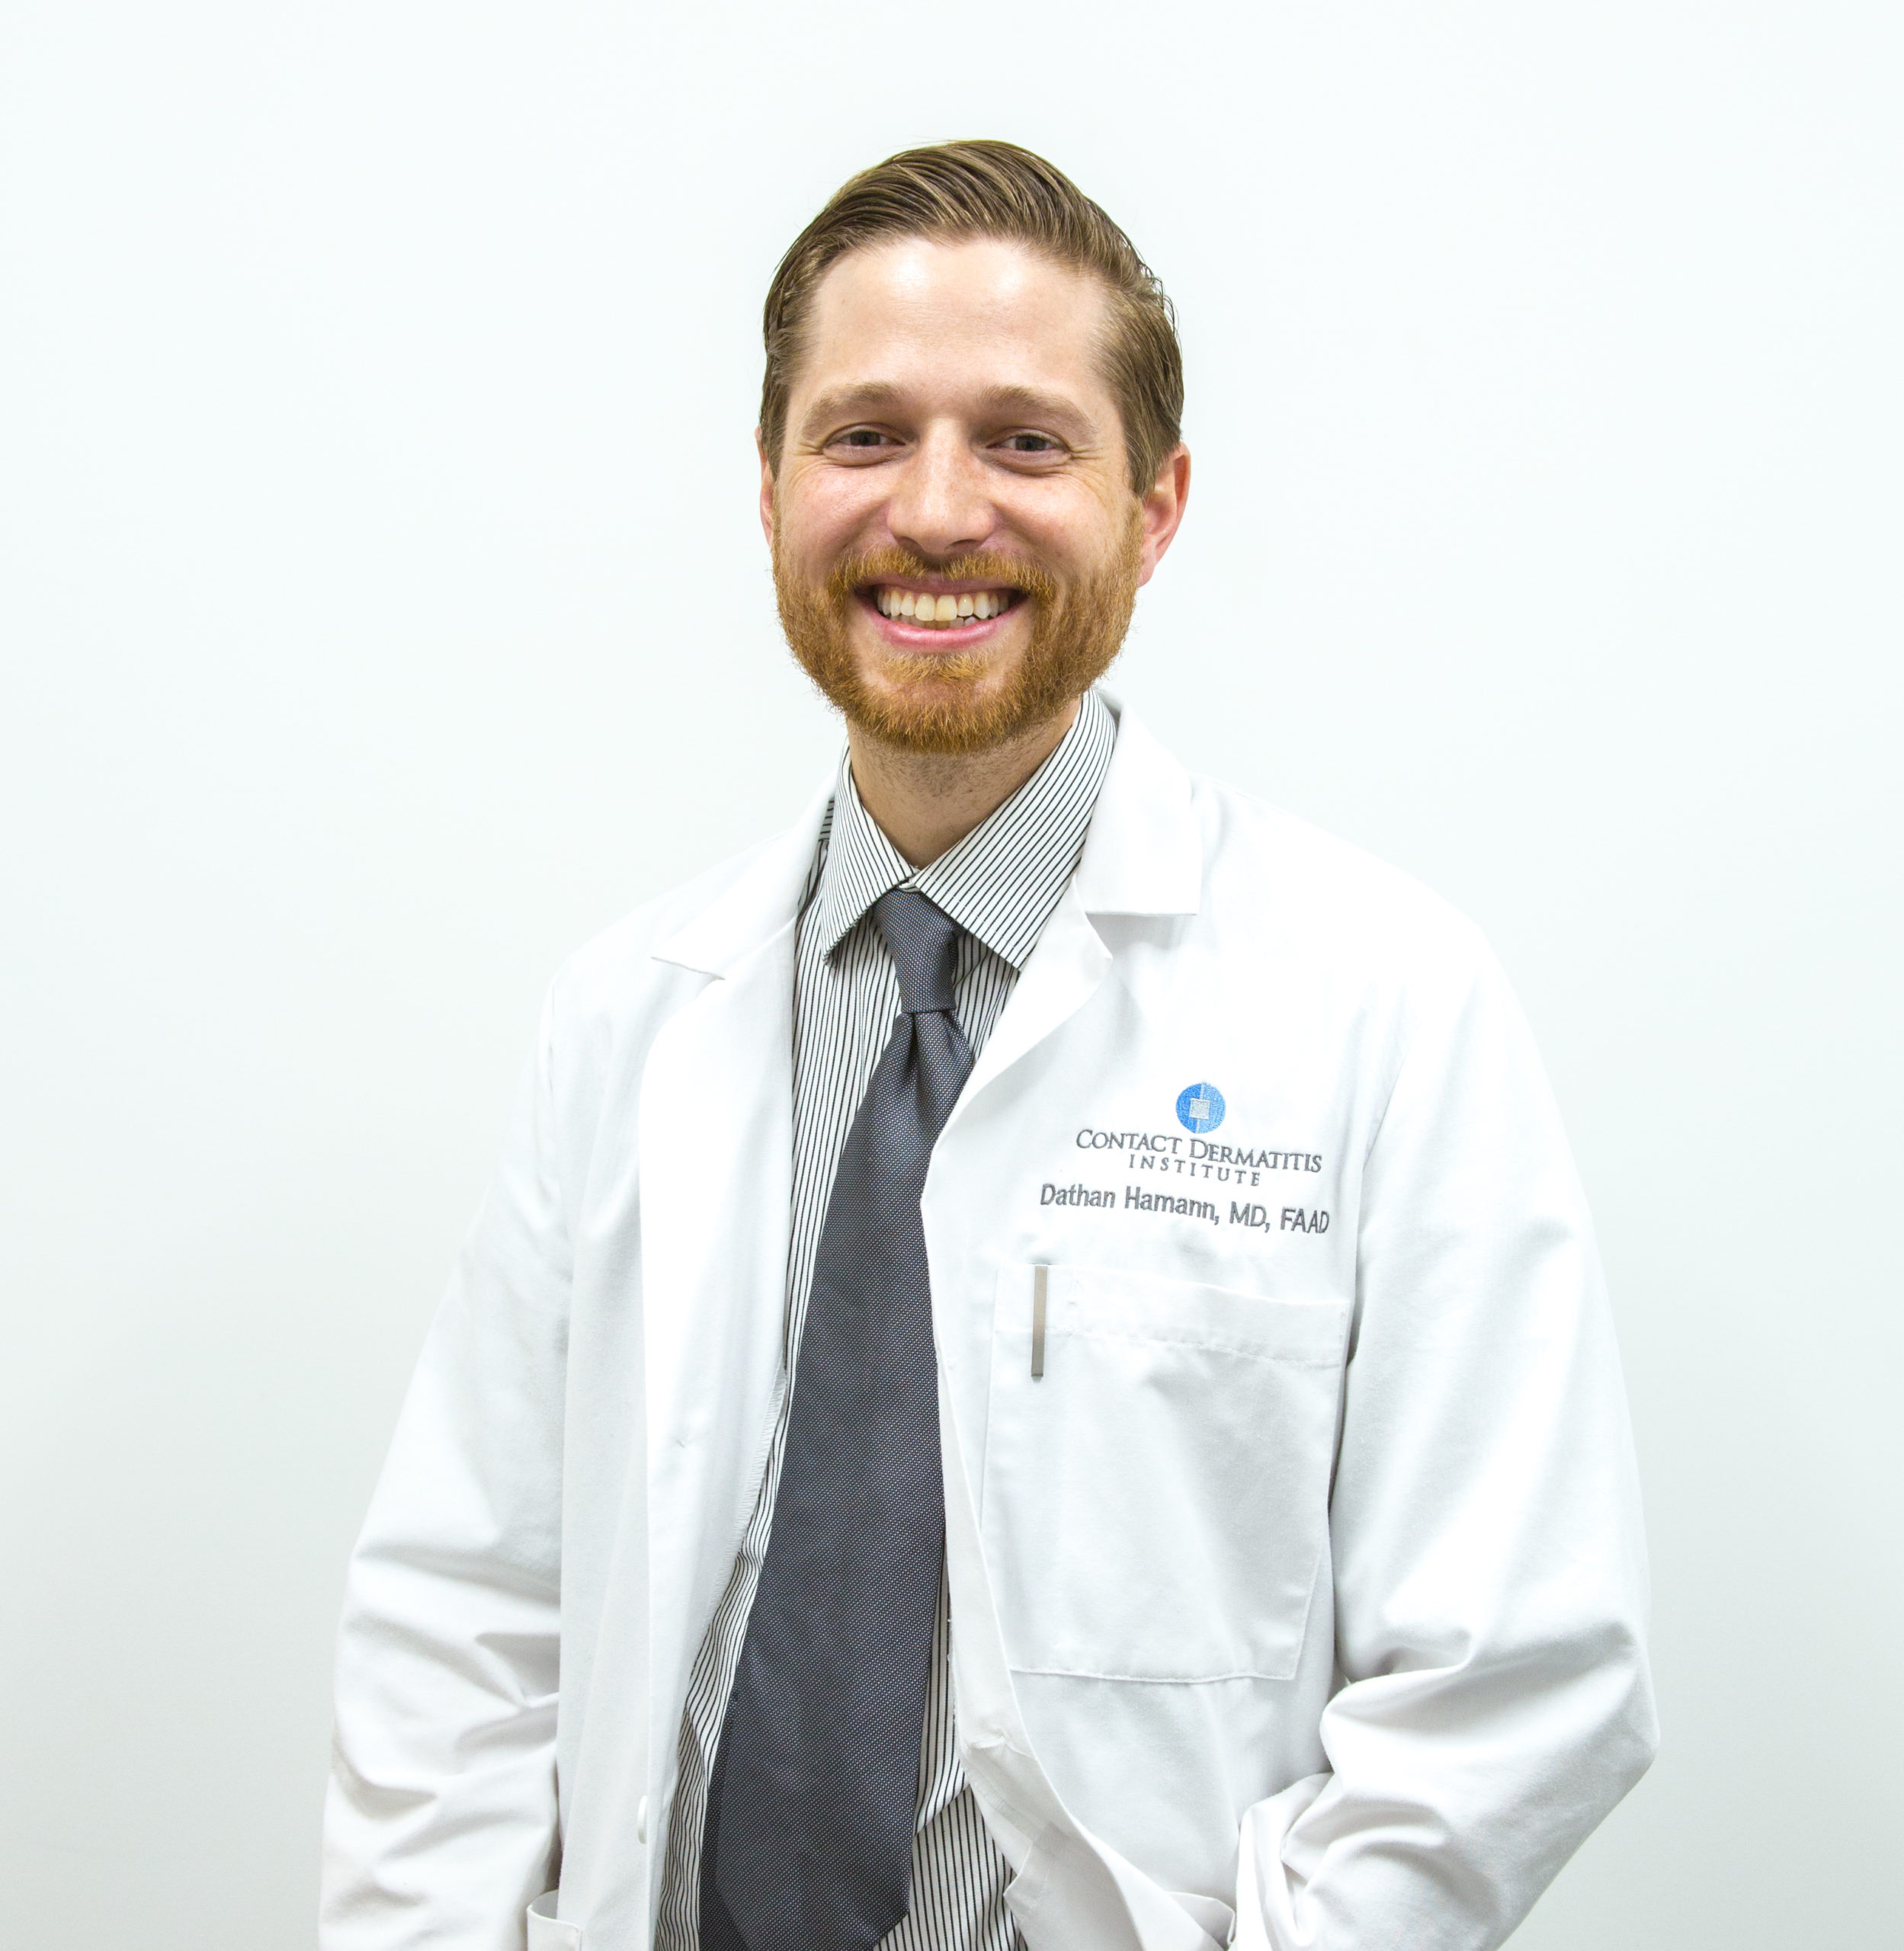 Q&A with Dr. Dathan Hamann, Contact Dermatitis Institute’s Medical Director: What Patient Products Can You Patch Test With